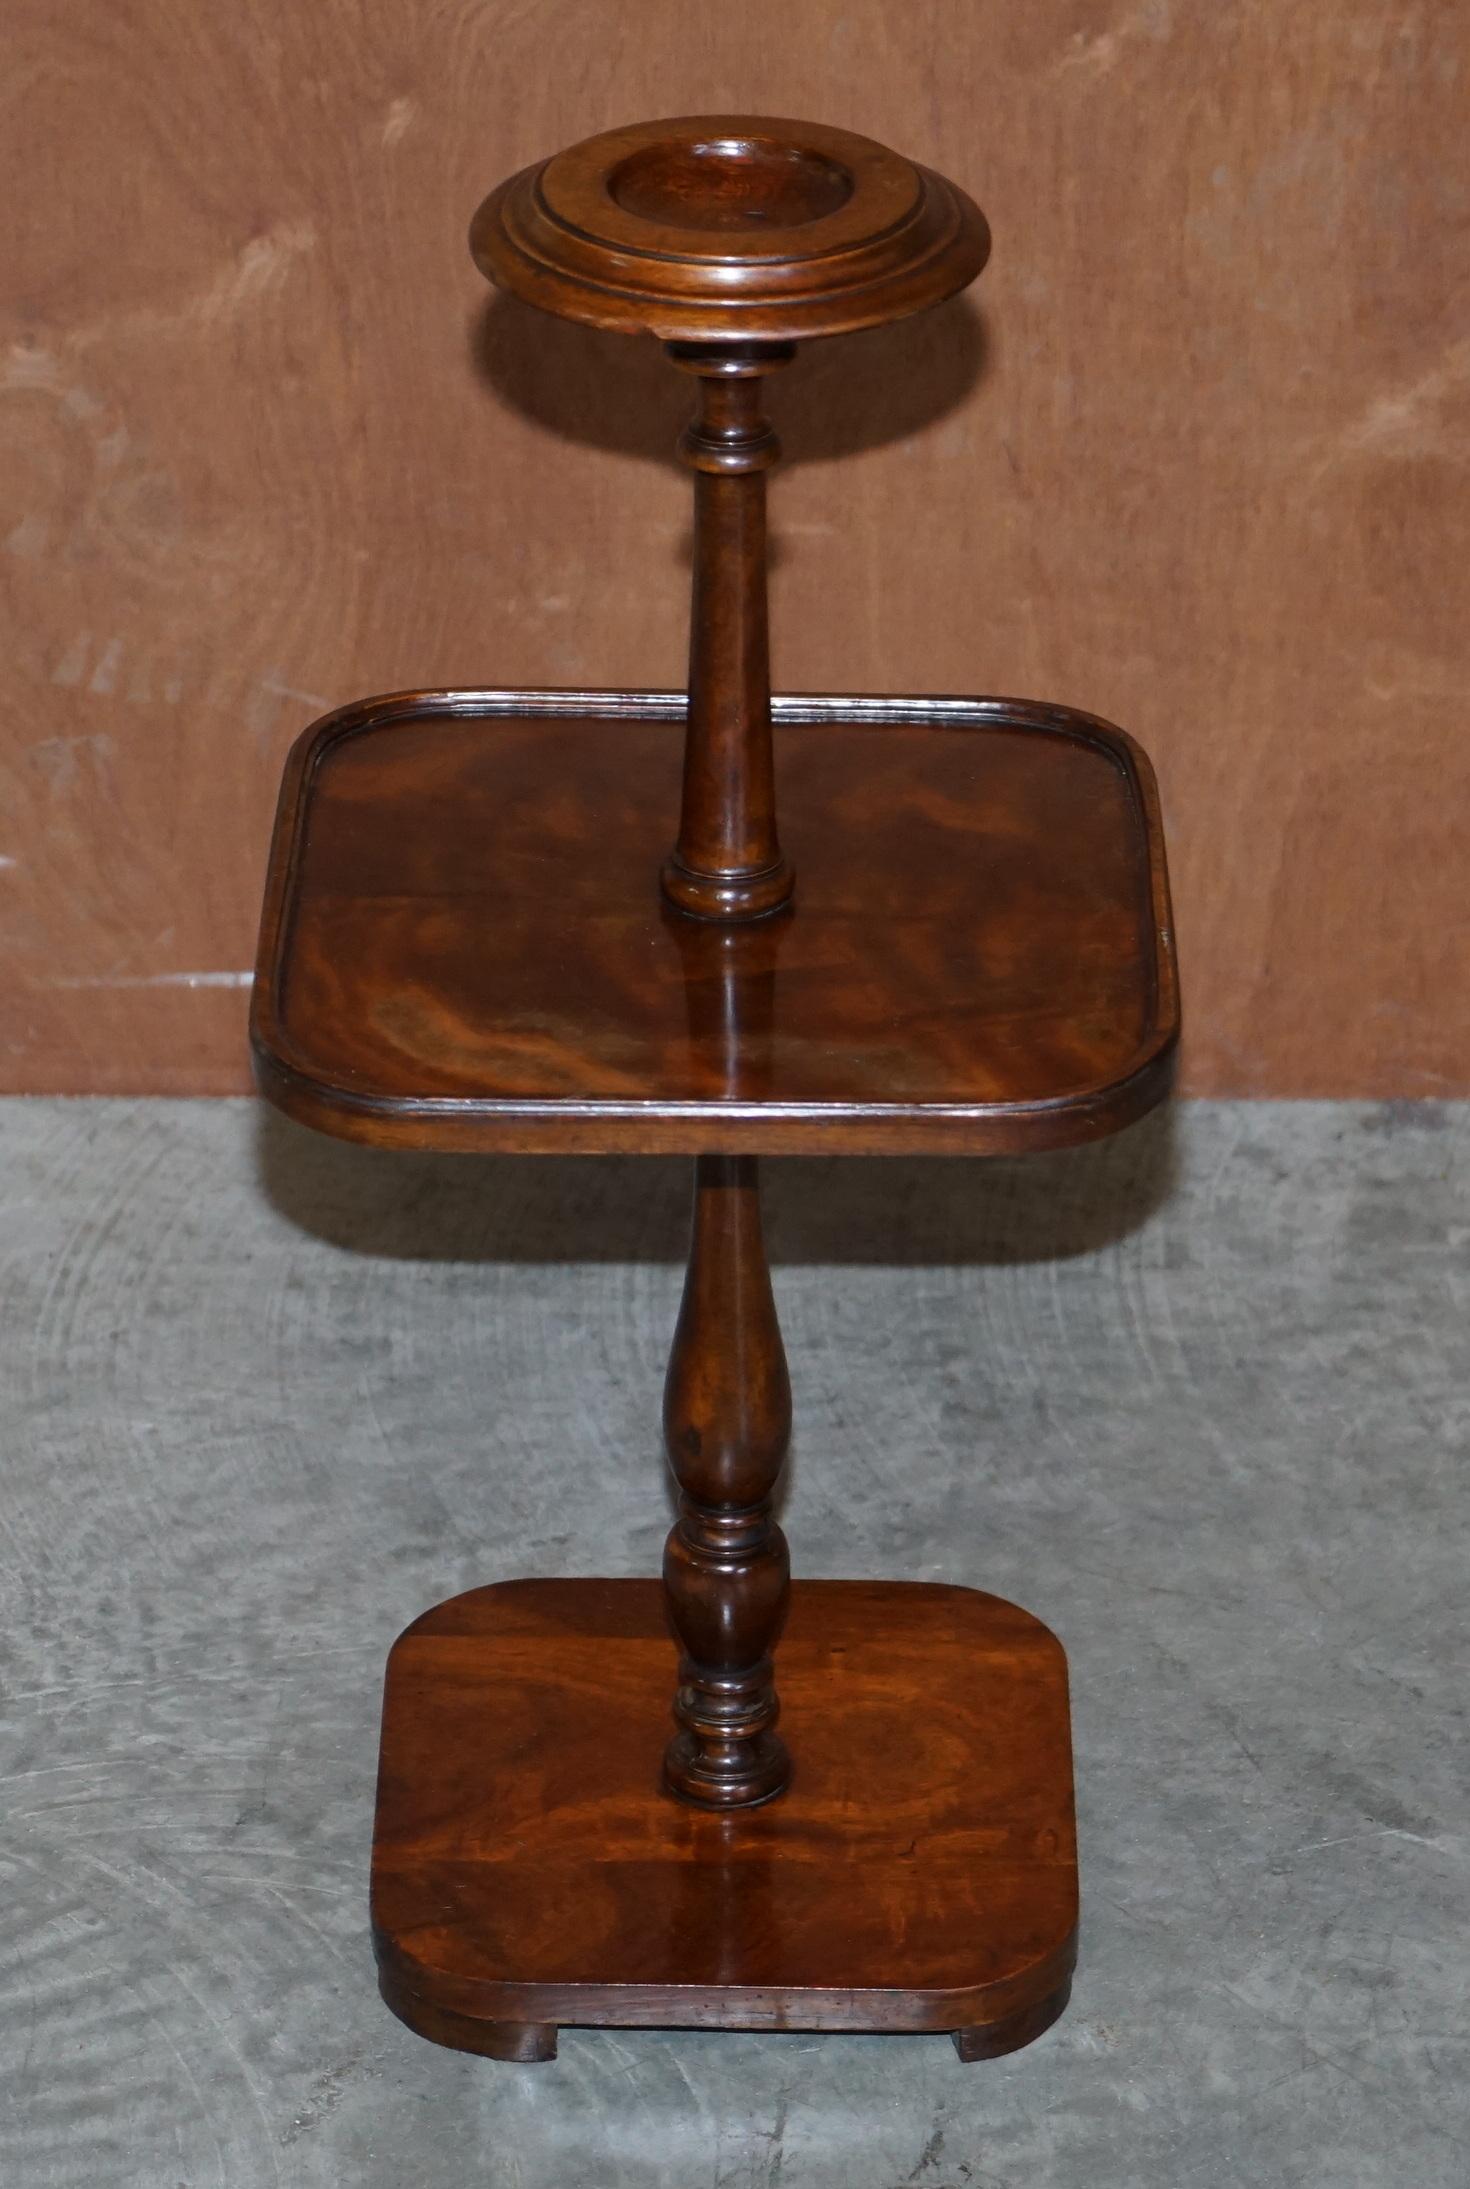 We are delighted to offer for sale this lovely flamed mahogany side end lamp wine table with jardinière top

A good looking and decorative side table or what not, the top tier looks like its for seating a small plant

We have cleaned waxed and